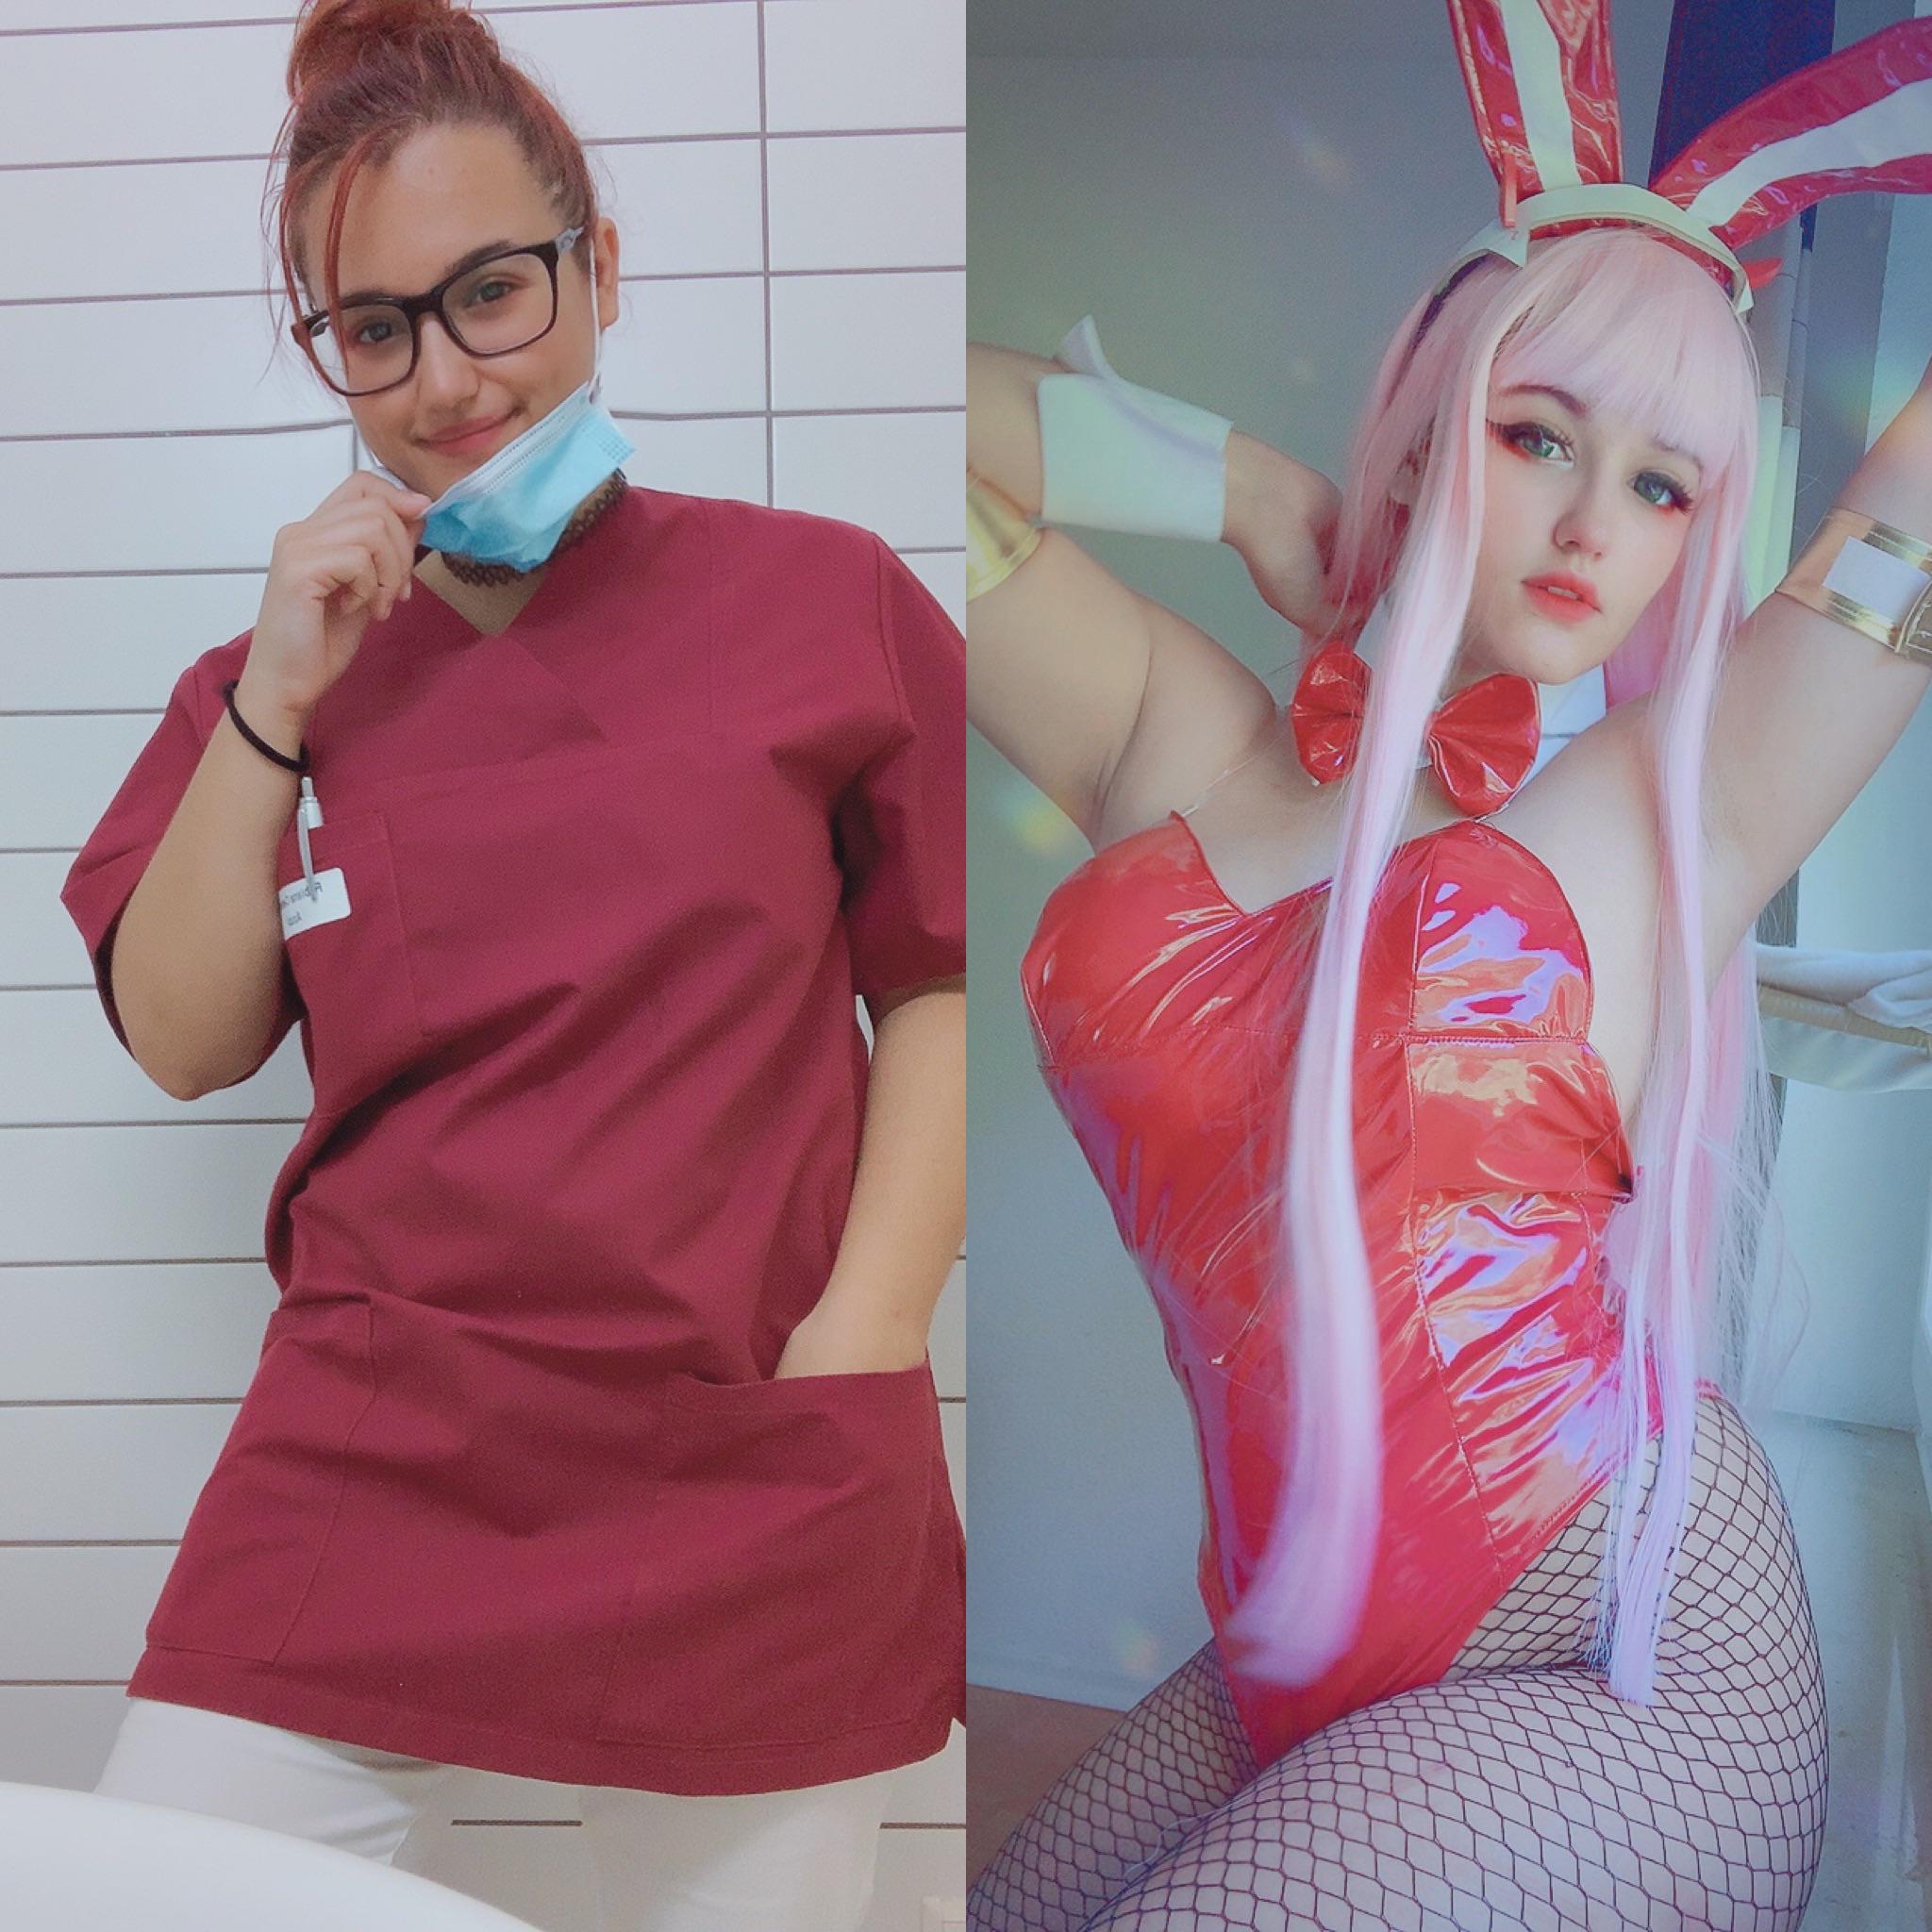 Nurse by day, Cosplayer by night